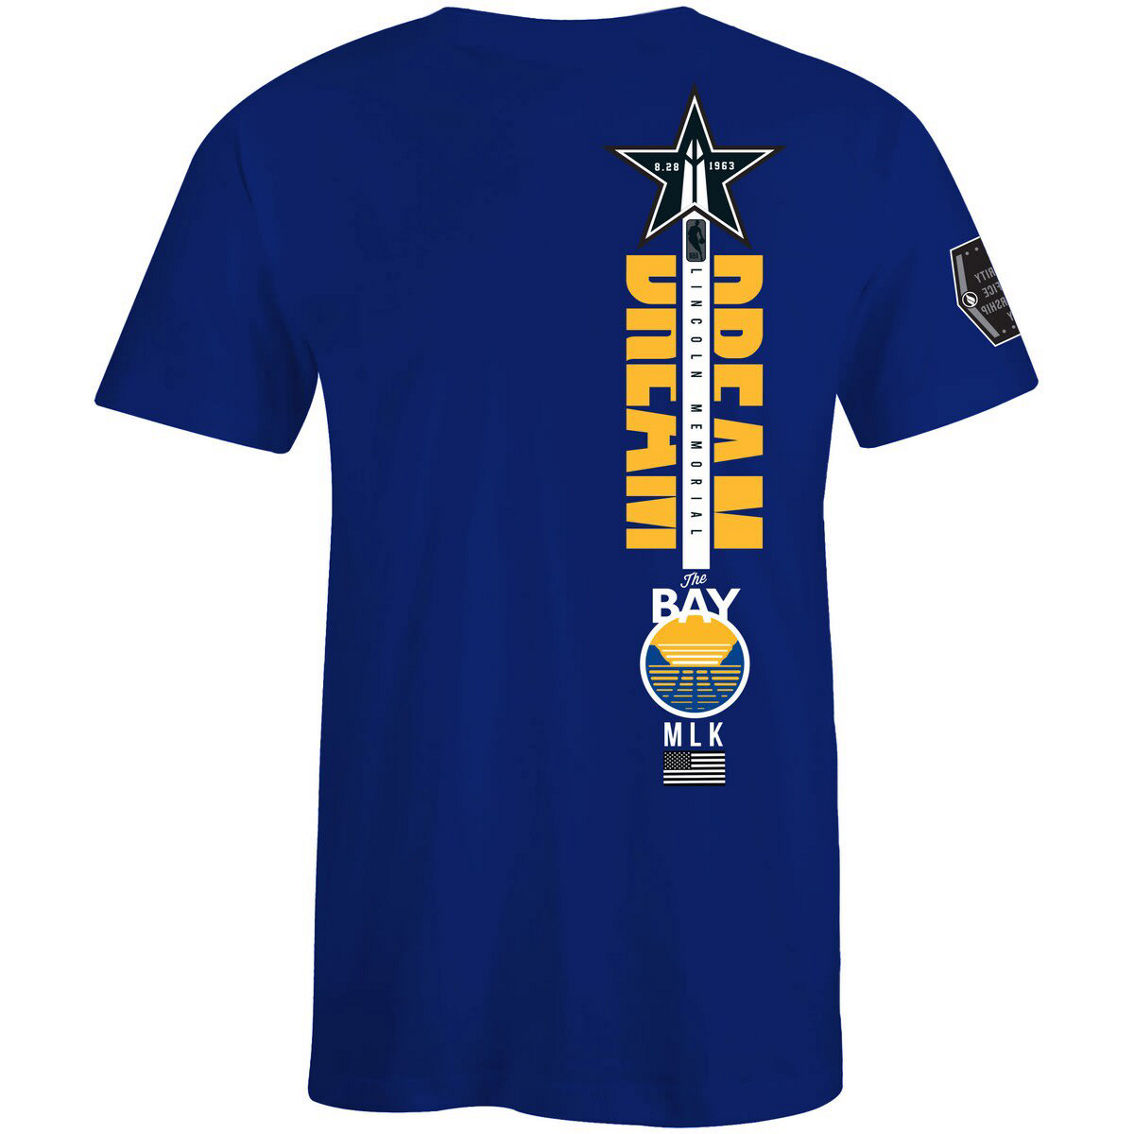 FISLL Unisex x Black History Collection Royal Golden State Warriors T-Shirt - Image 4 of 4